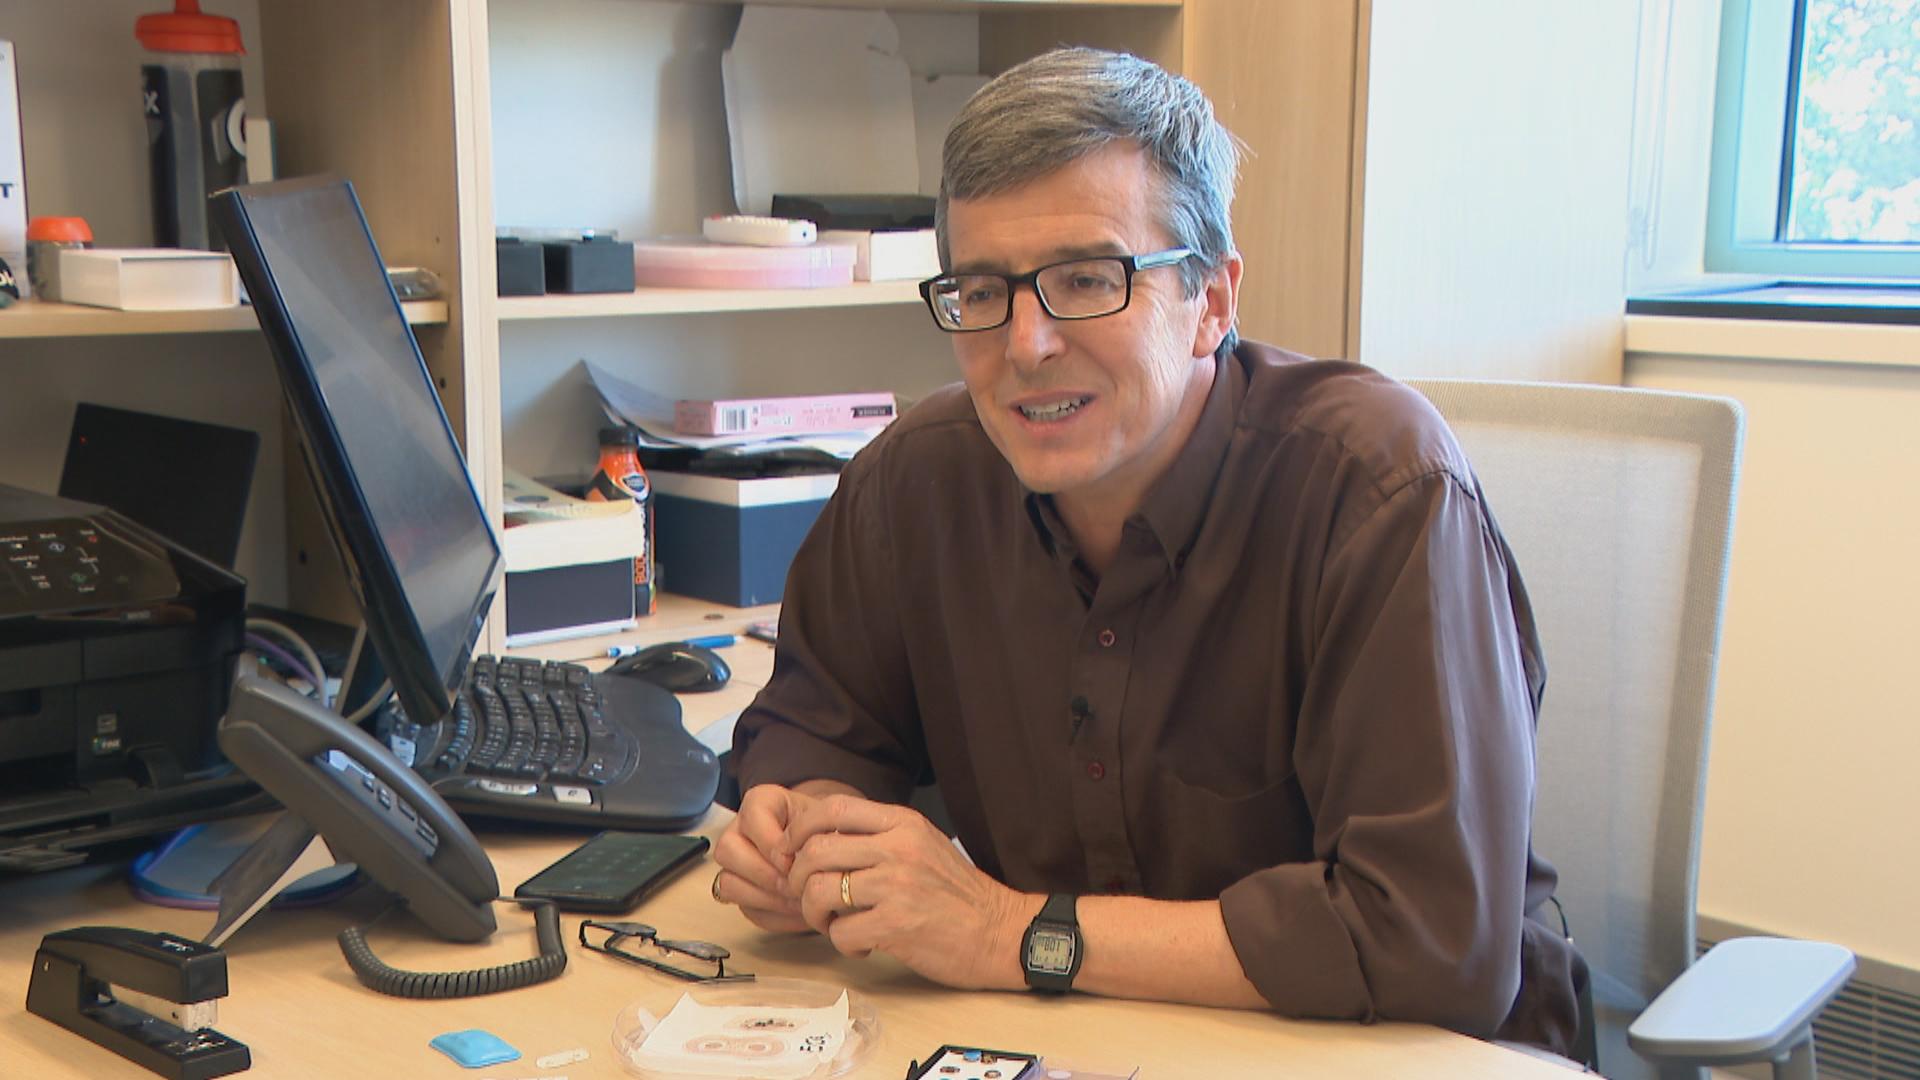 John Rogers, who leads the Center for Bio-Integrated Electronics at Northwestern University. (WTTW News)